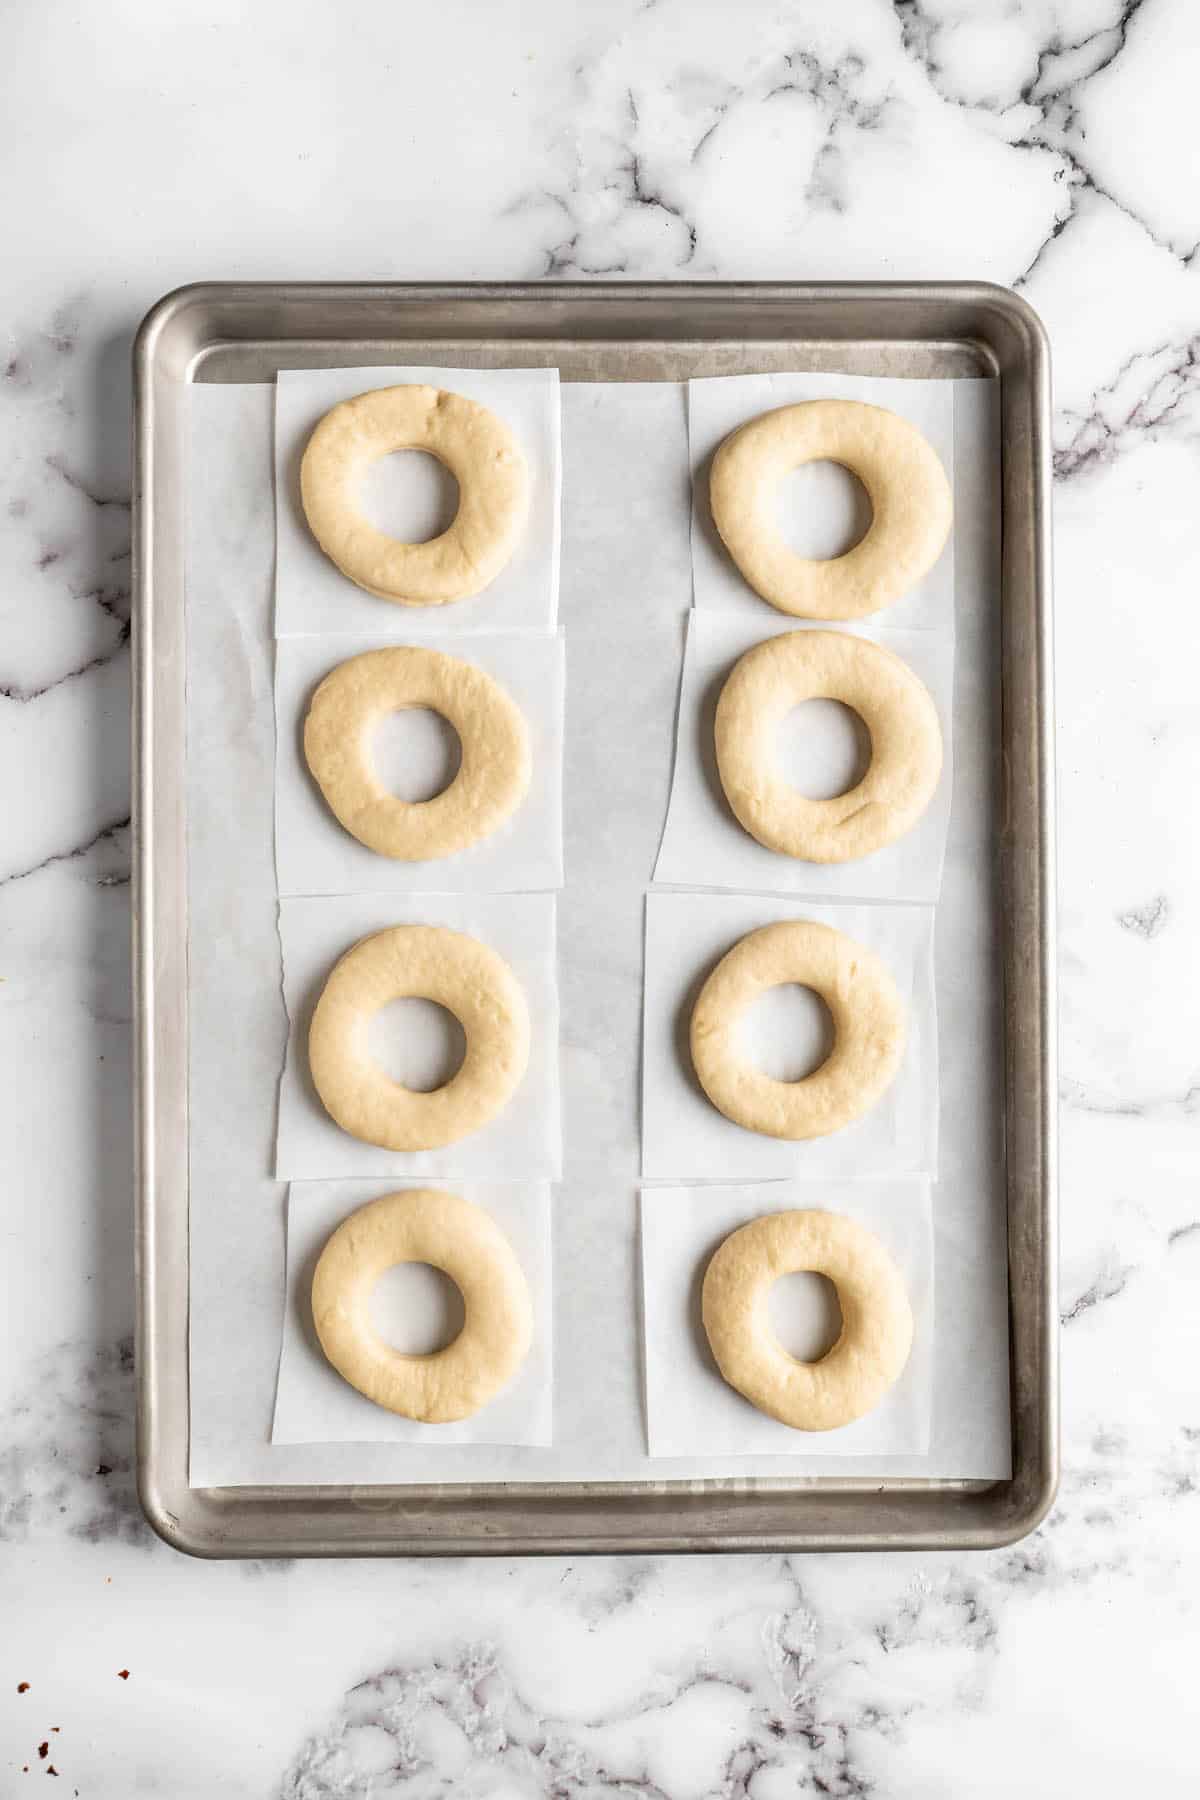 Uncooked donuts on a tray with parchment paper